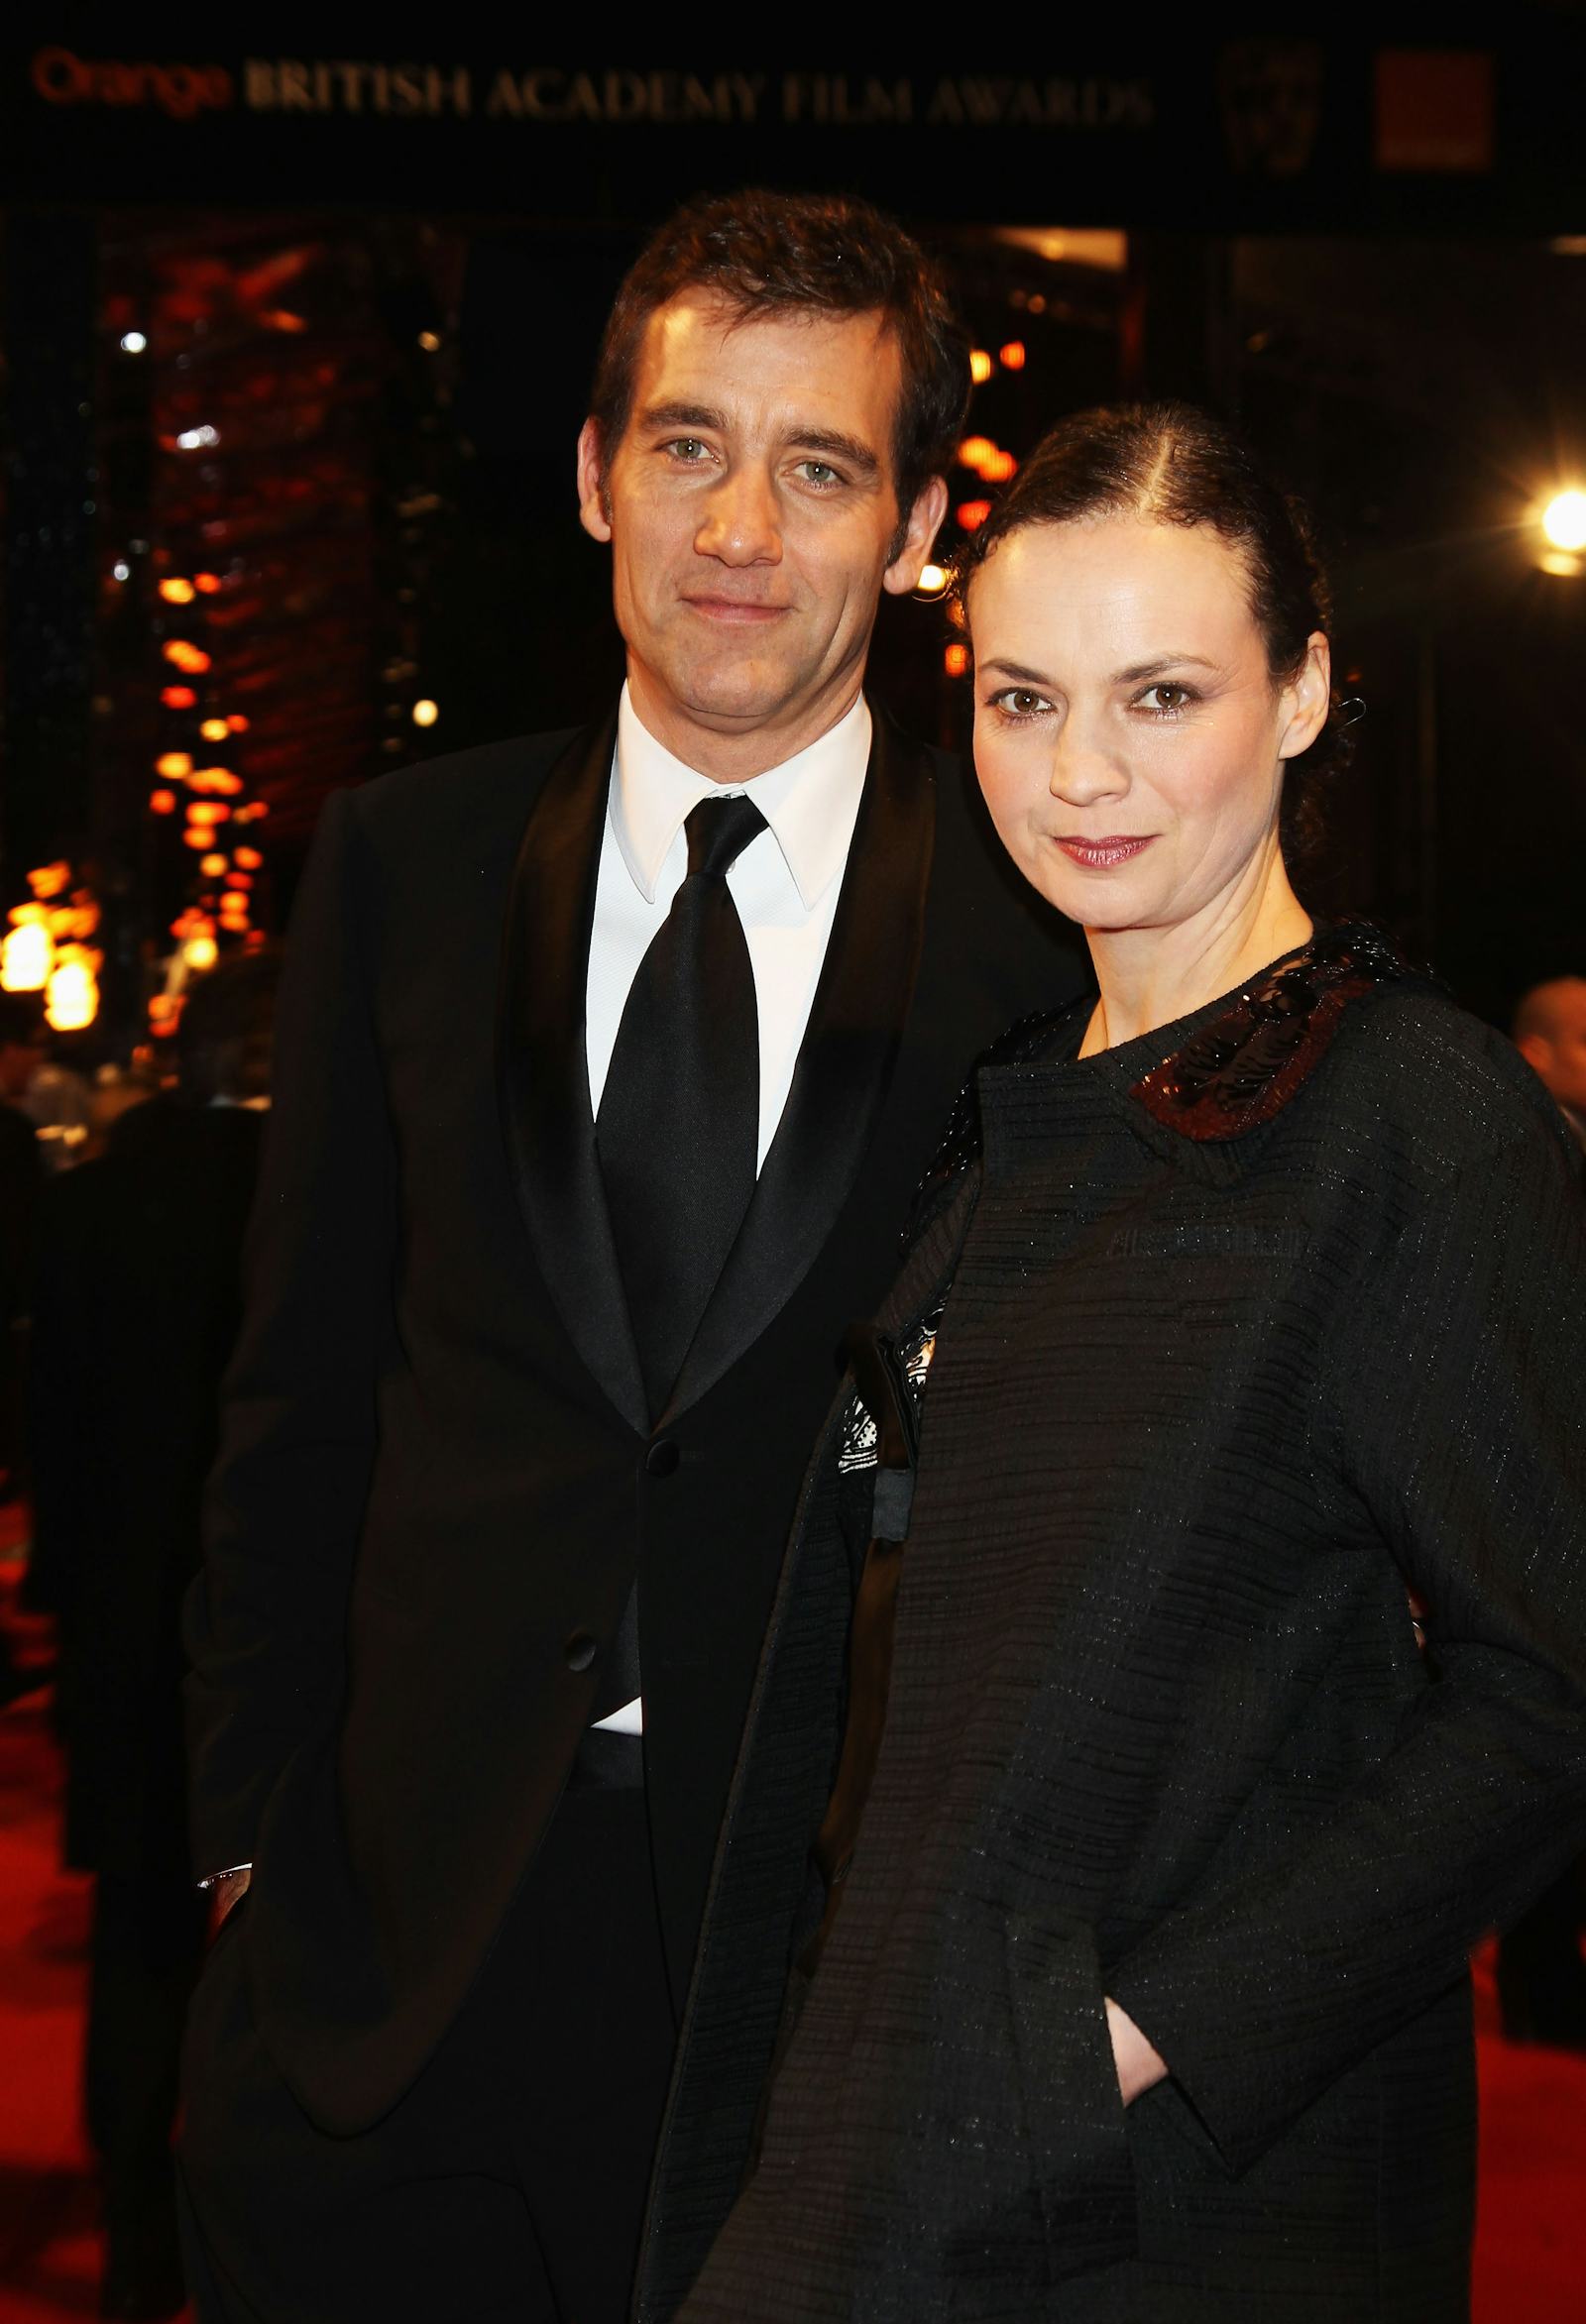 Who is Clive Owen's Wife? SarahJane Fenton Used to Act, But Now She's